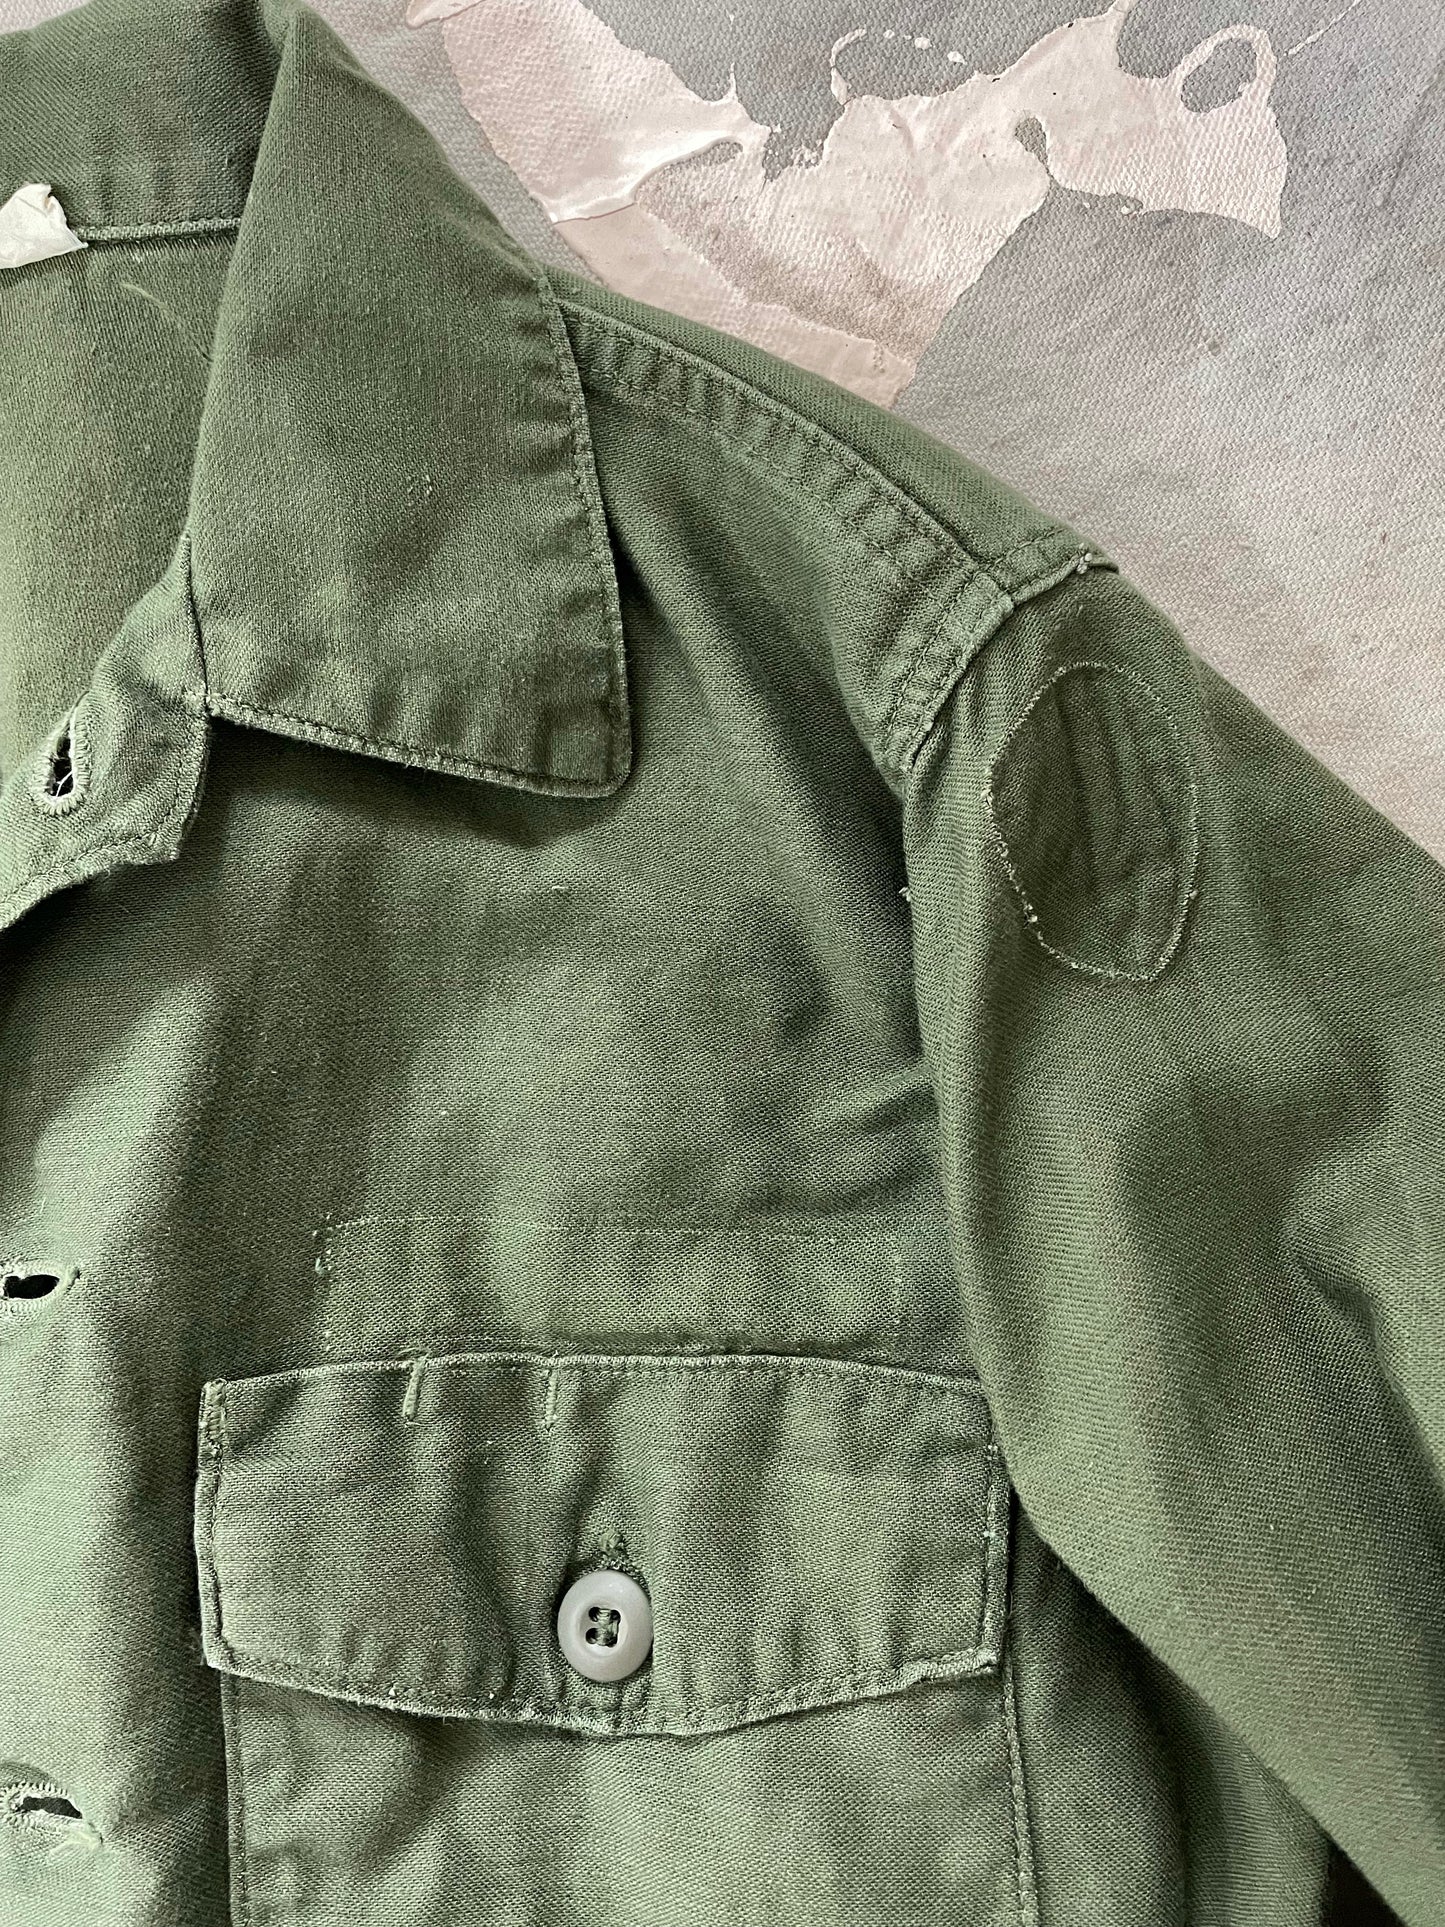 60s OG-107 Button Down Army Shirt